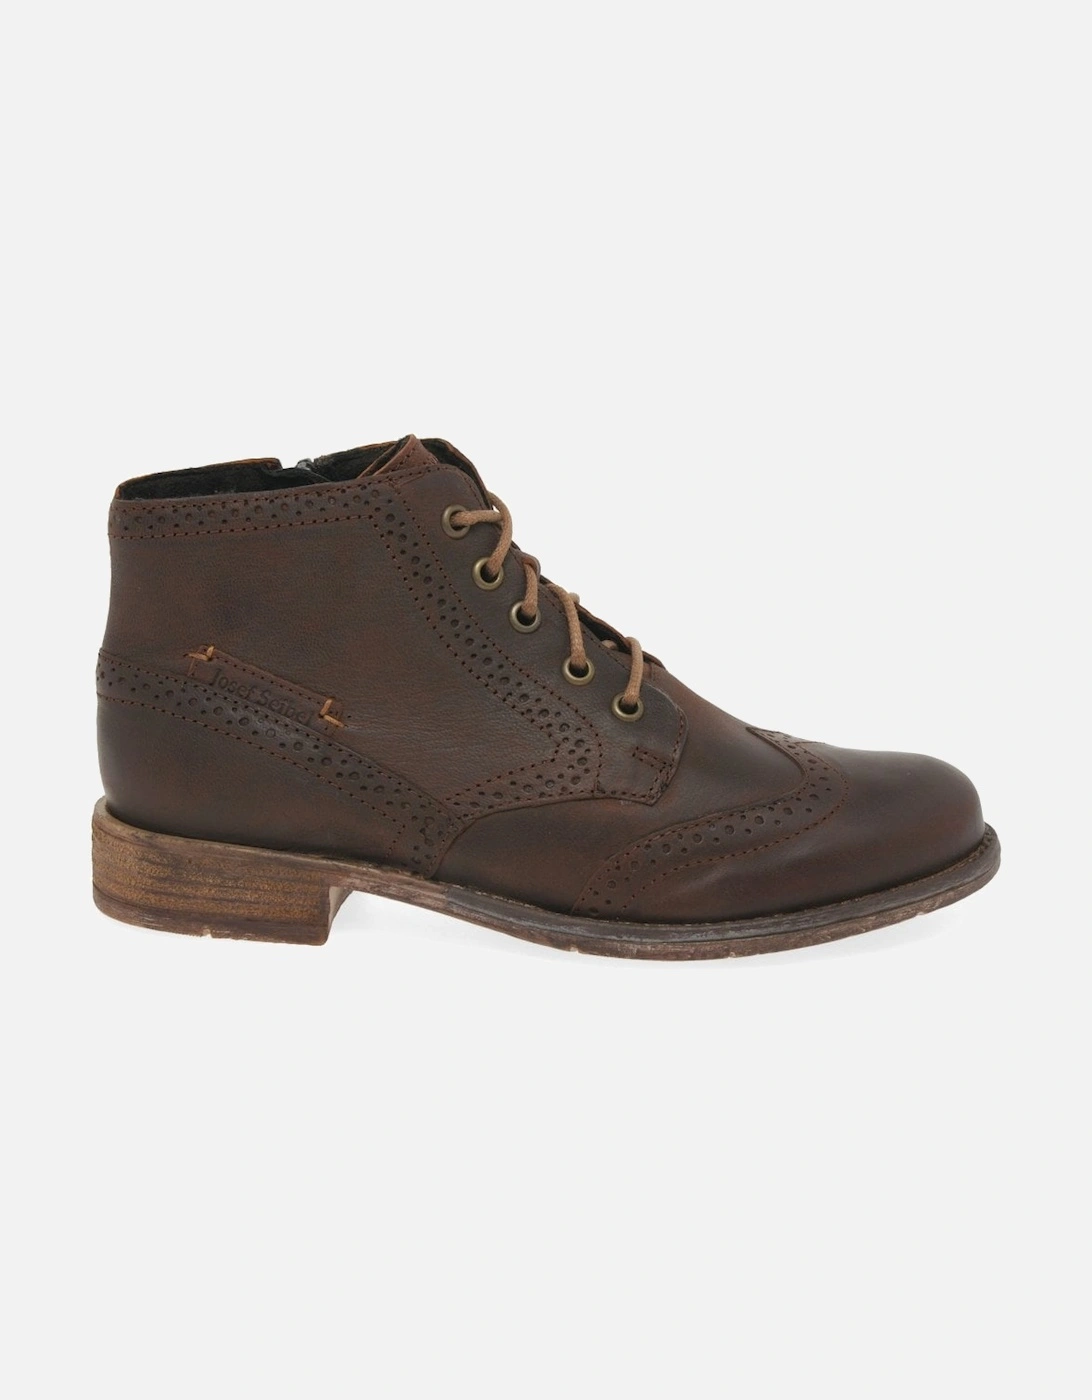 Sienna 74 Womens Brogue Ankle Boots